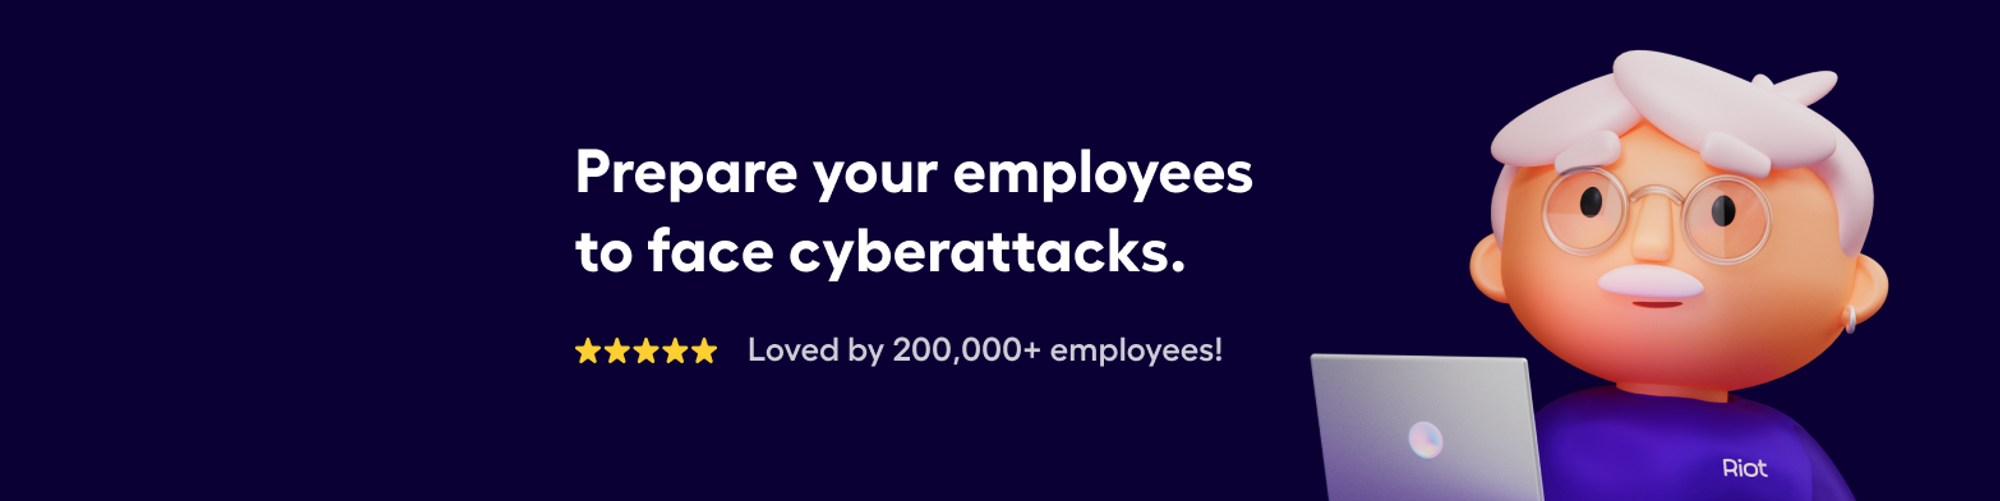 Prepare your employees to face cyberattacks, says Albert, Riot's spokescharacter.